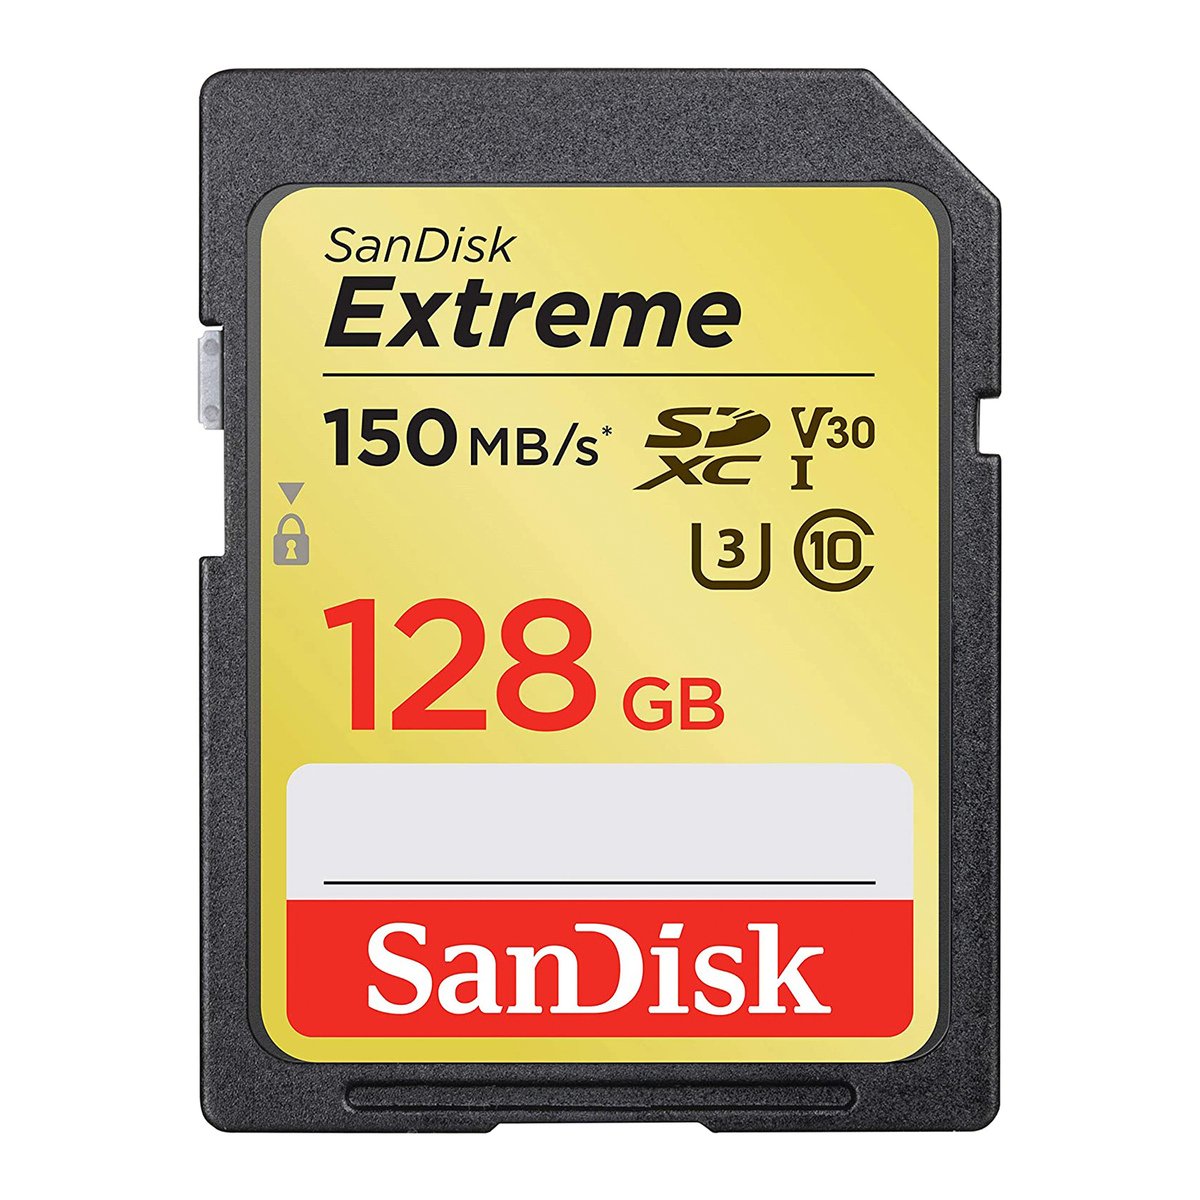 SanDisk Extreme 128GB SDXC Memory Card up to 150MB/s, UHS-I, Class 10, U3, V30